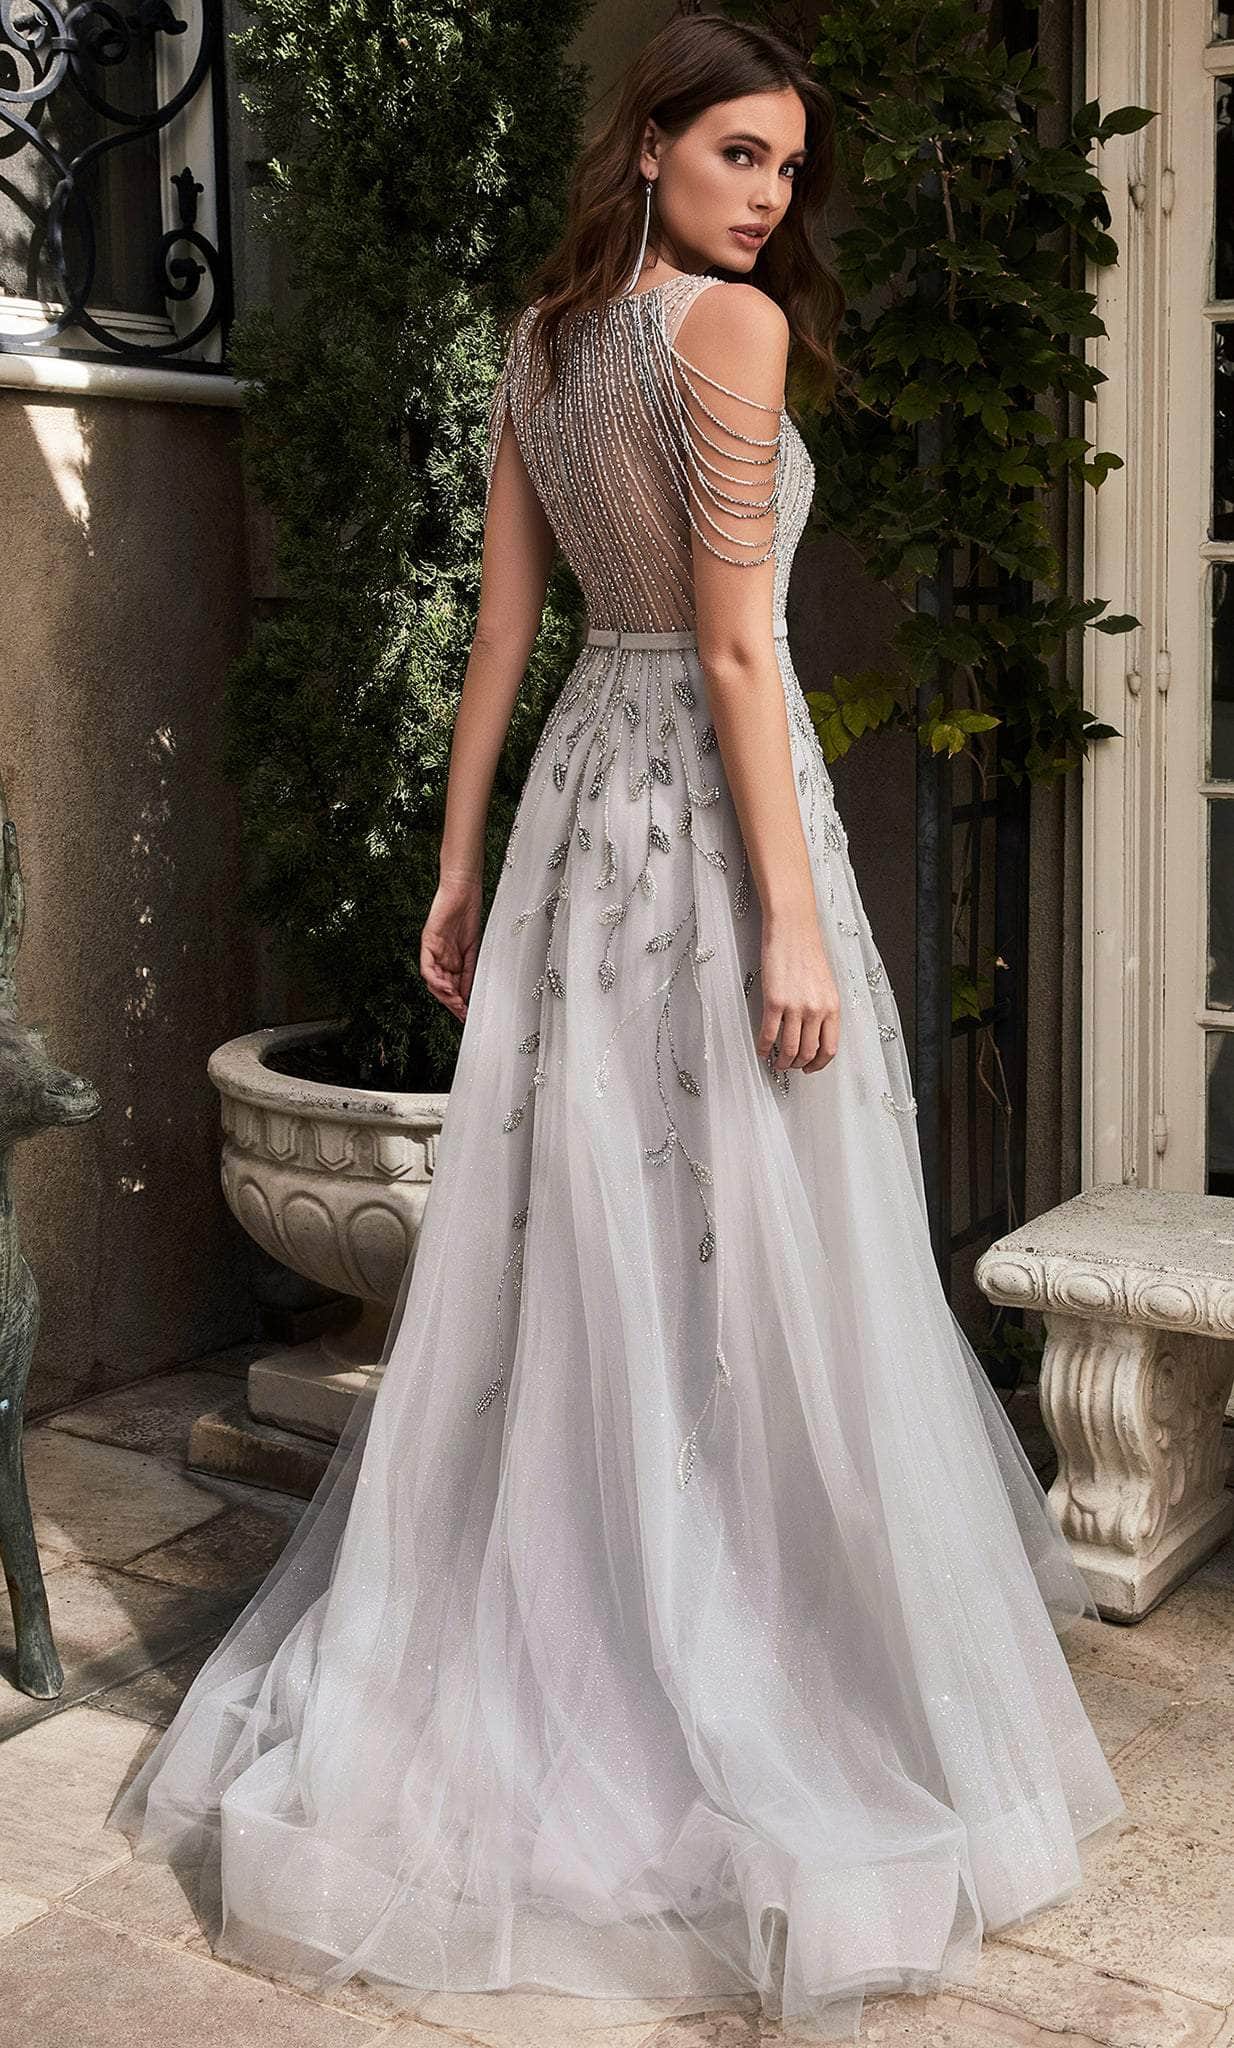 Ladivine B710 - A-line Gown